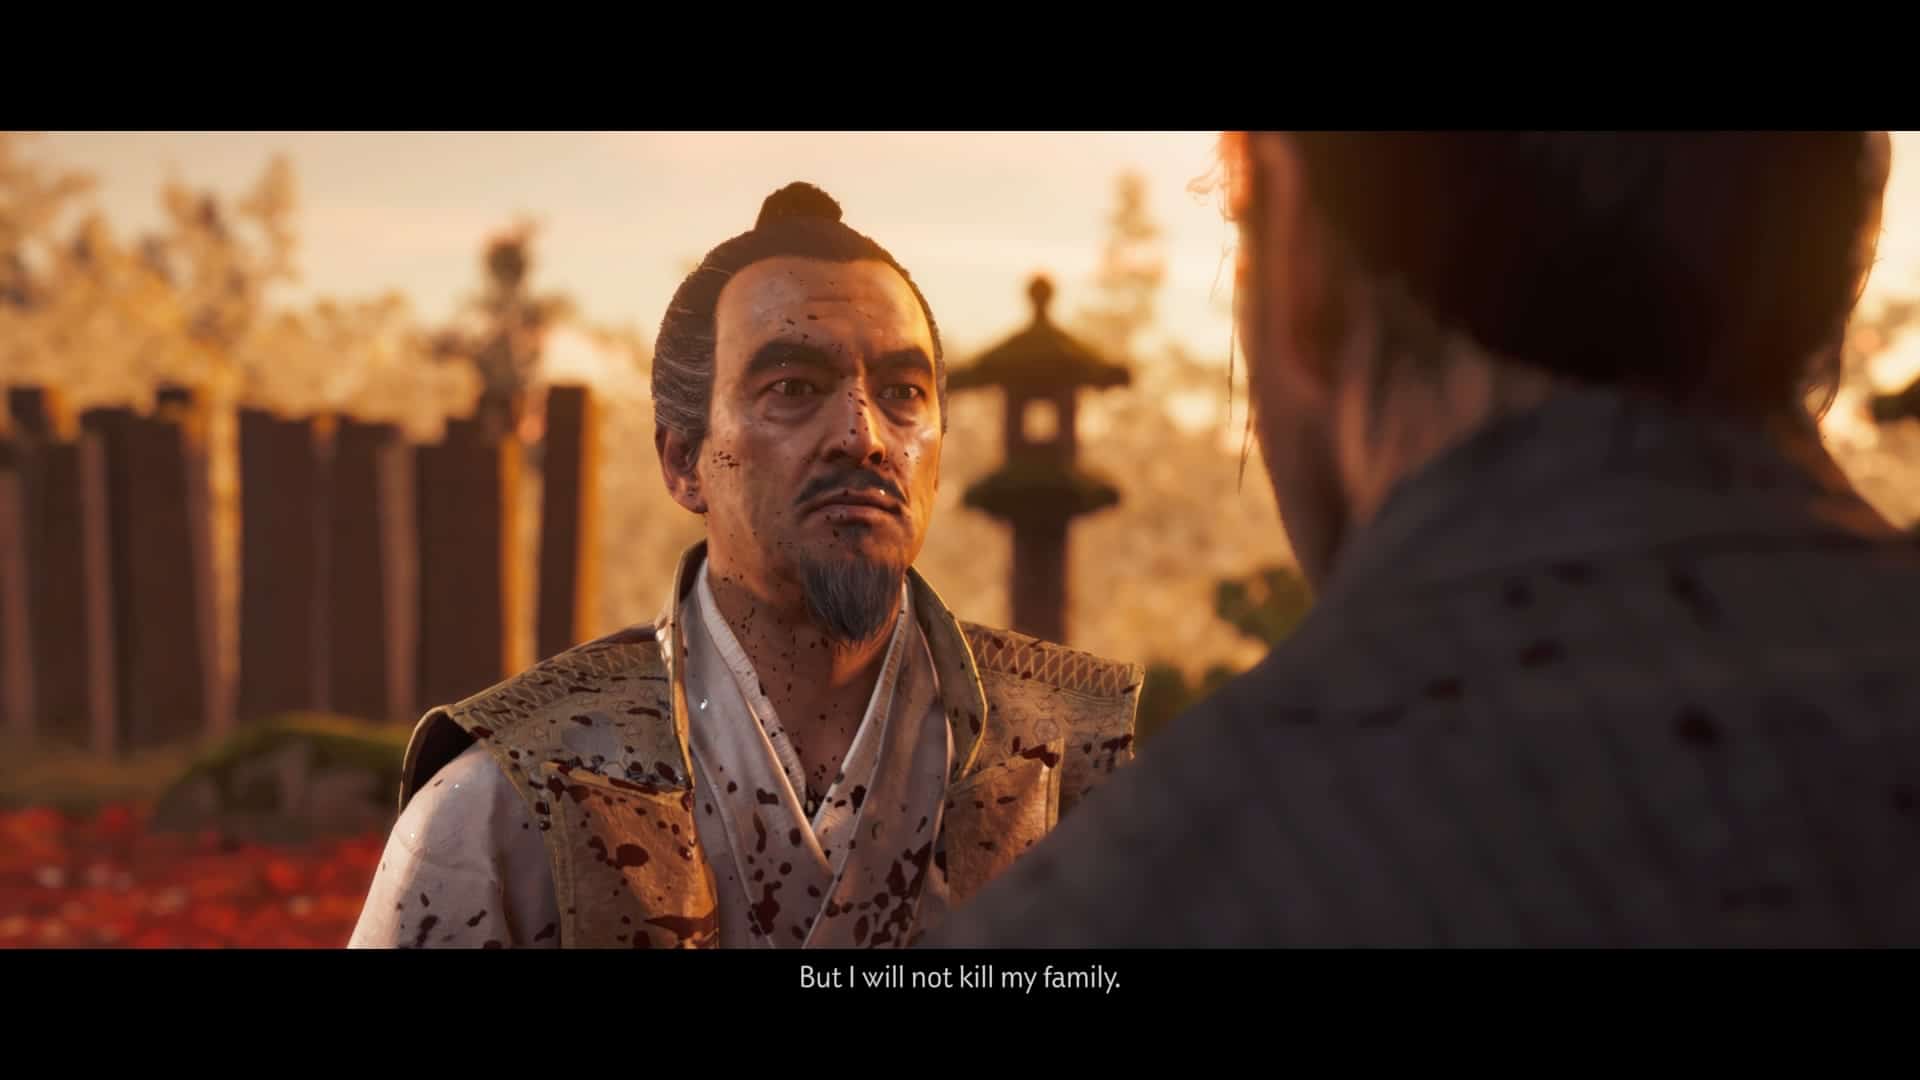 Ghost of Tsushima ending choice uncle Lord Shimura live or die, honor and samurai code, caste system adherence